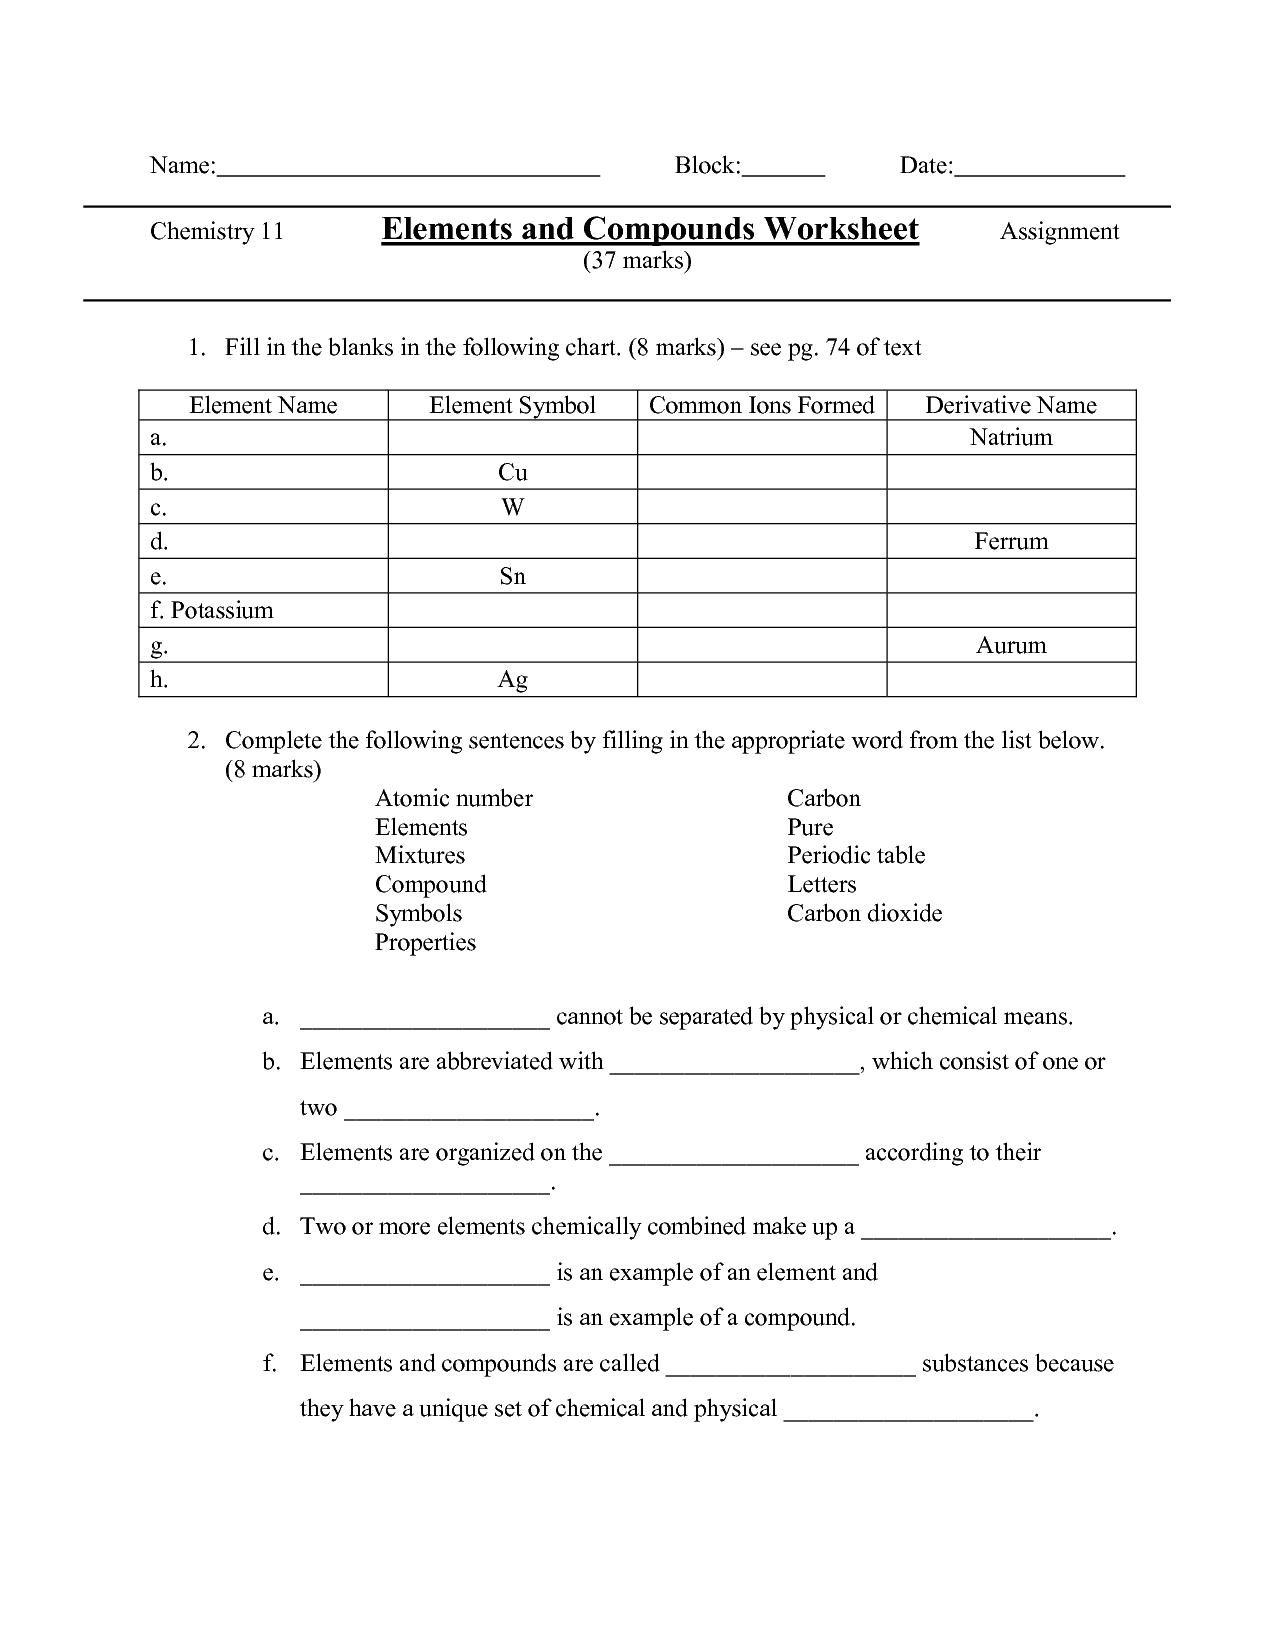 17-best-images-of-elements-compounds-and-mixtures-worksheet-element-compound-mixture-worksheet